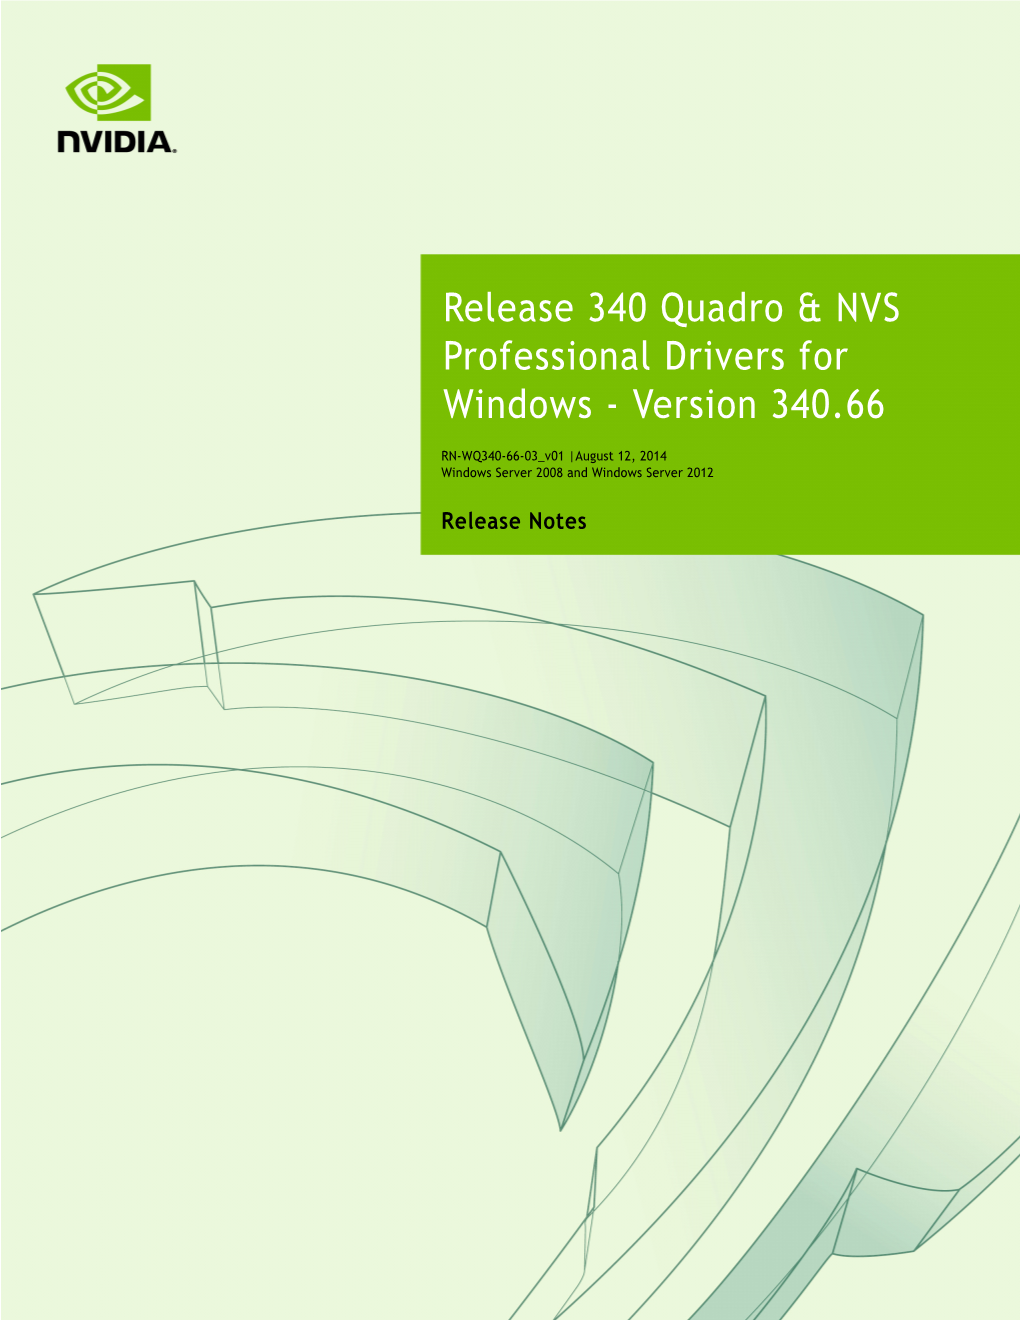 Release 340 Quadro & NVS Professional Drivers for Windows